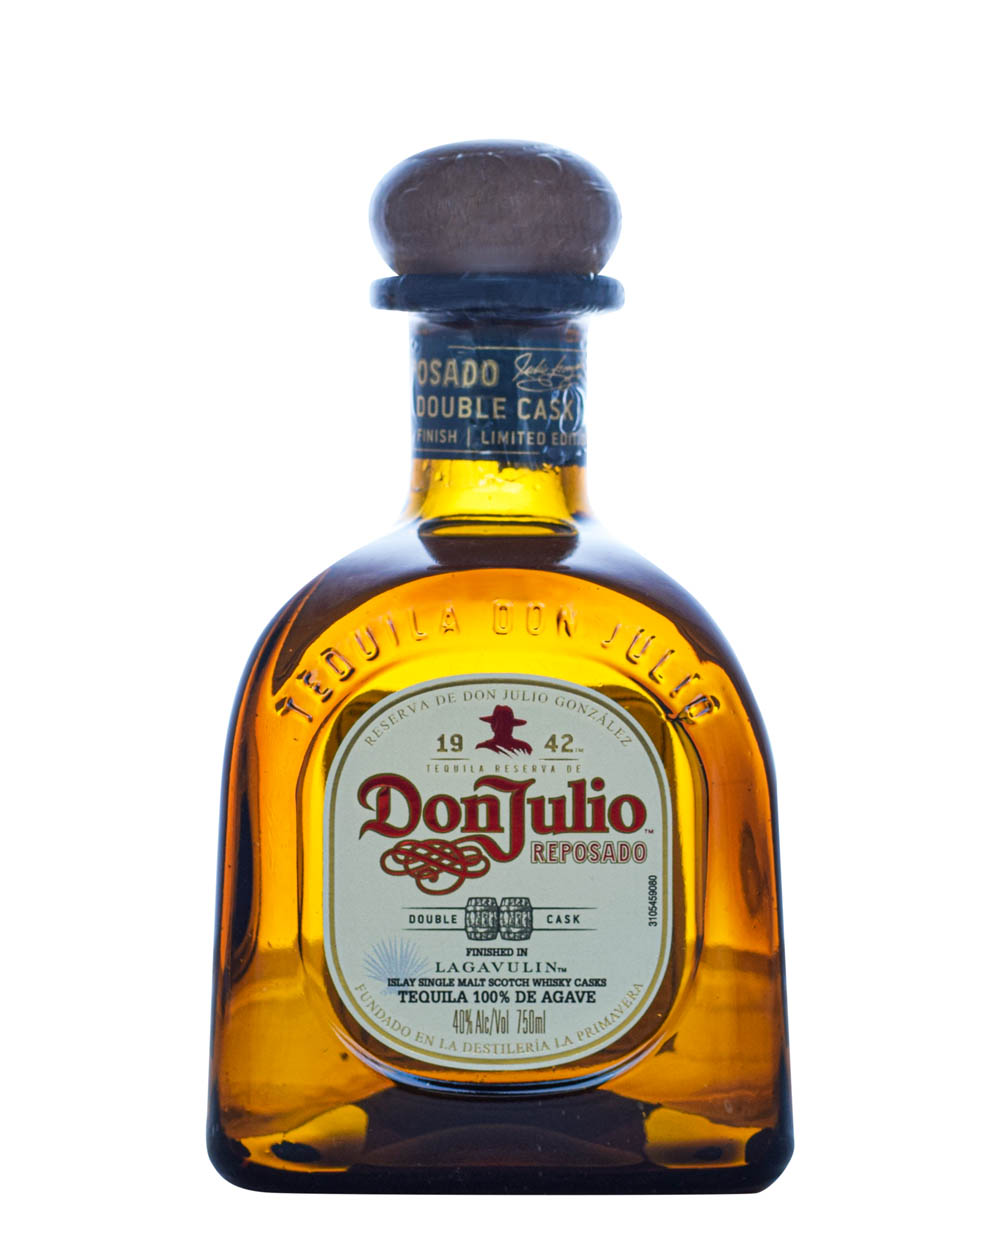 Don Julio Reposado Tequila Finished in Lagavulin Casks Musthave Malts MHM